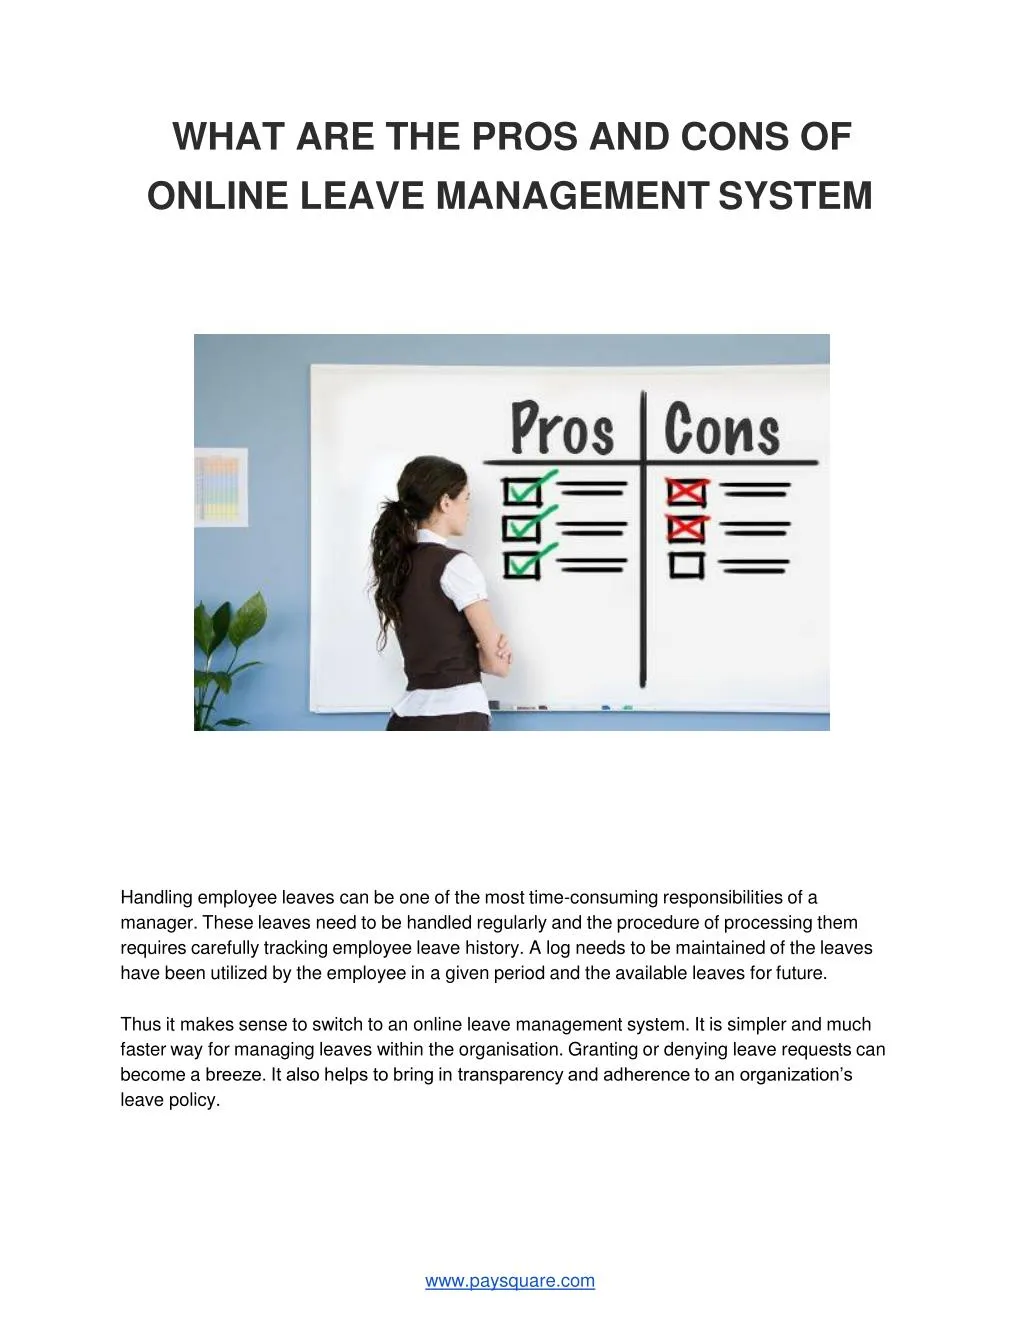 what are the pros and cons of online leave management system